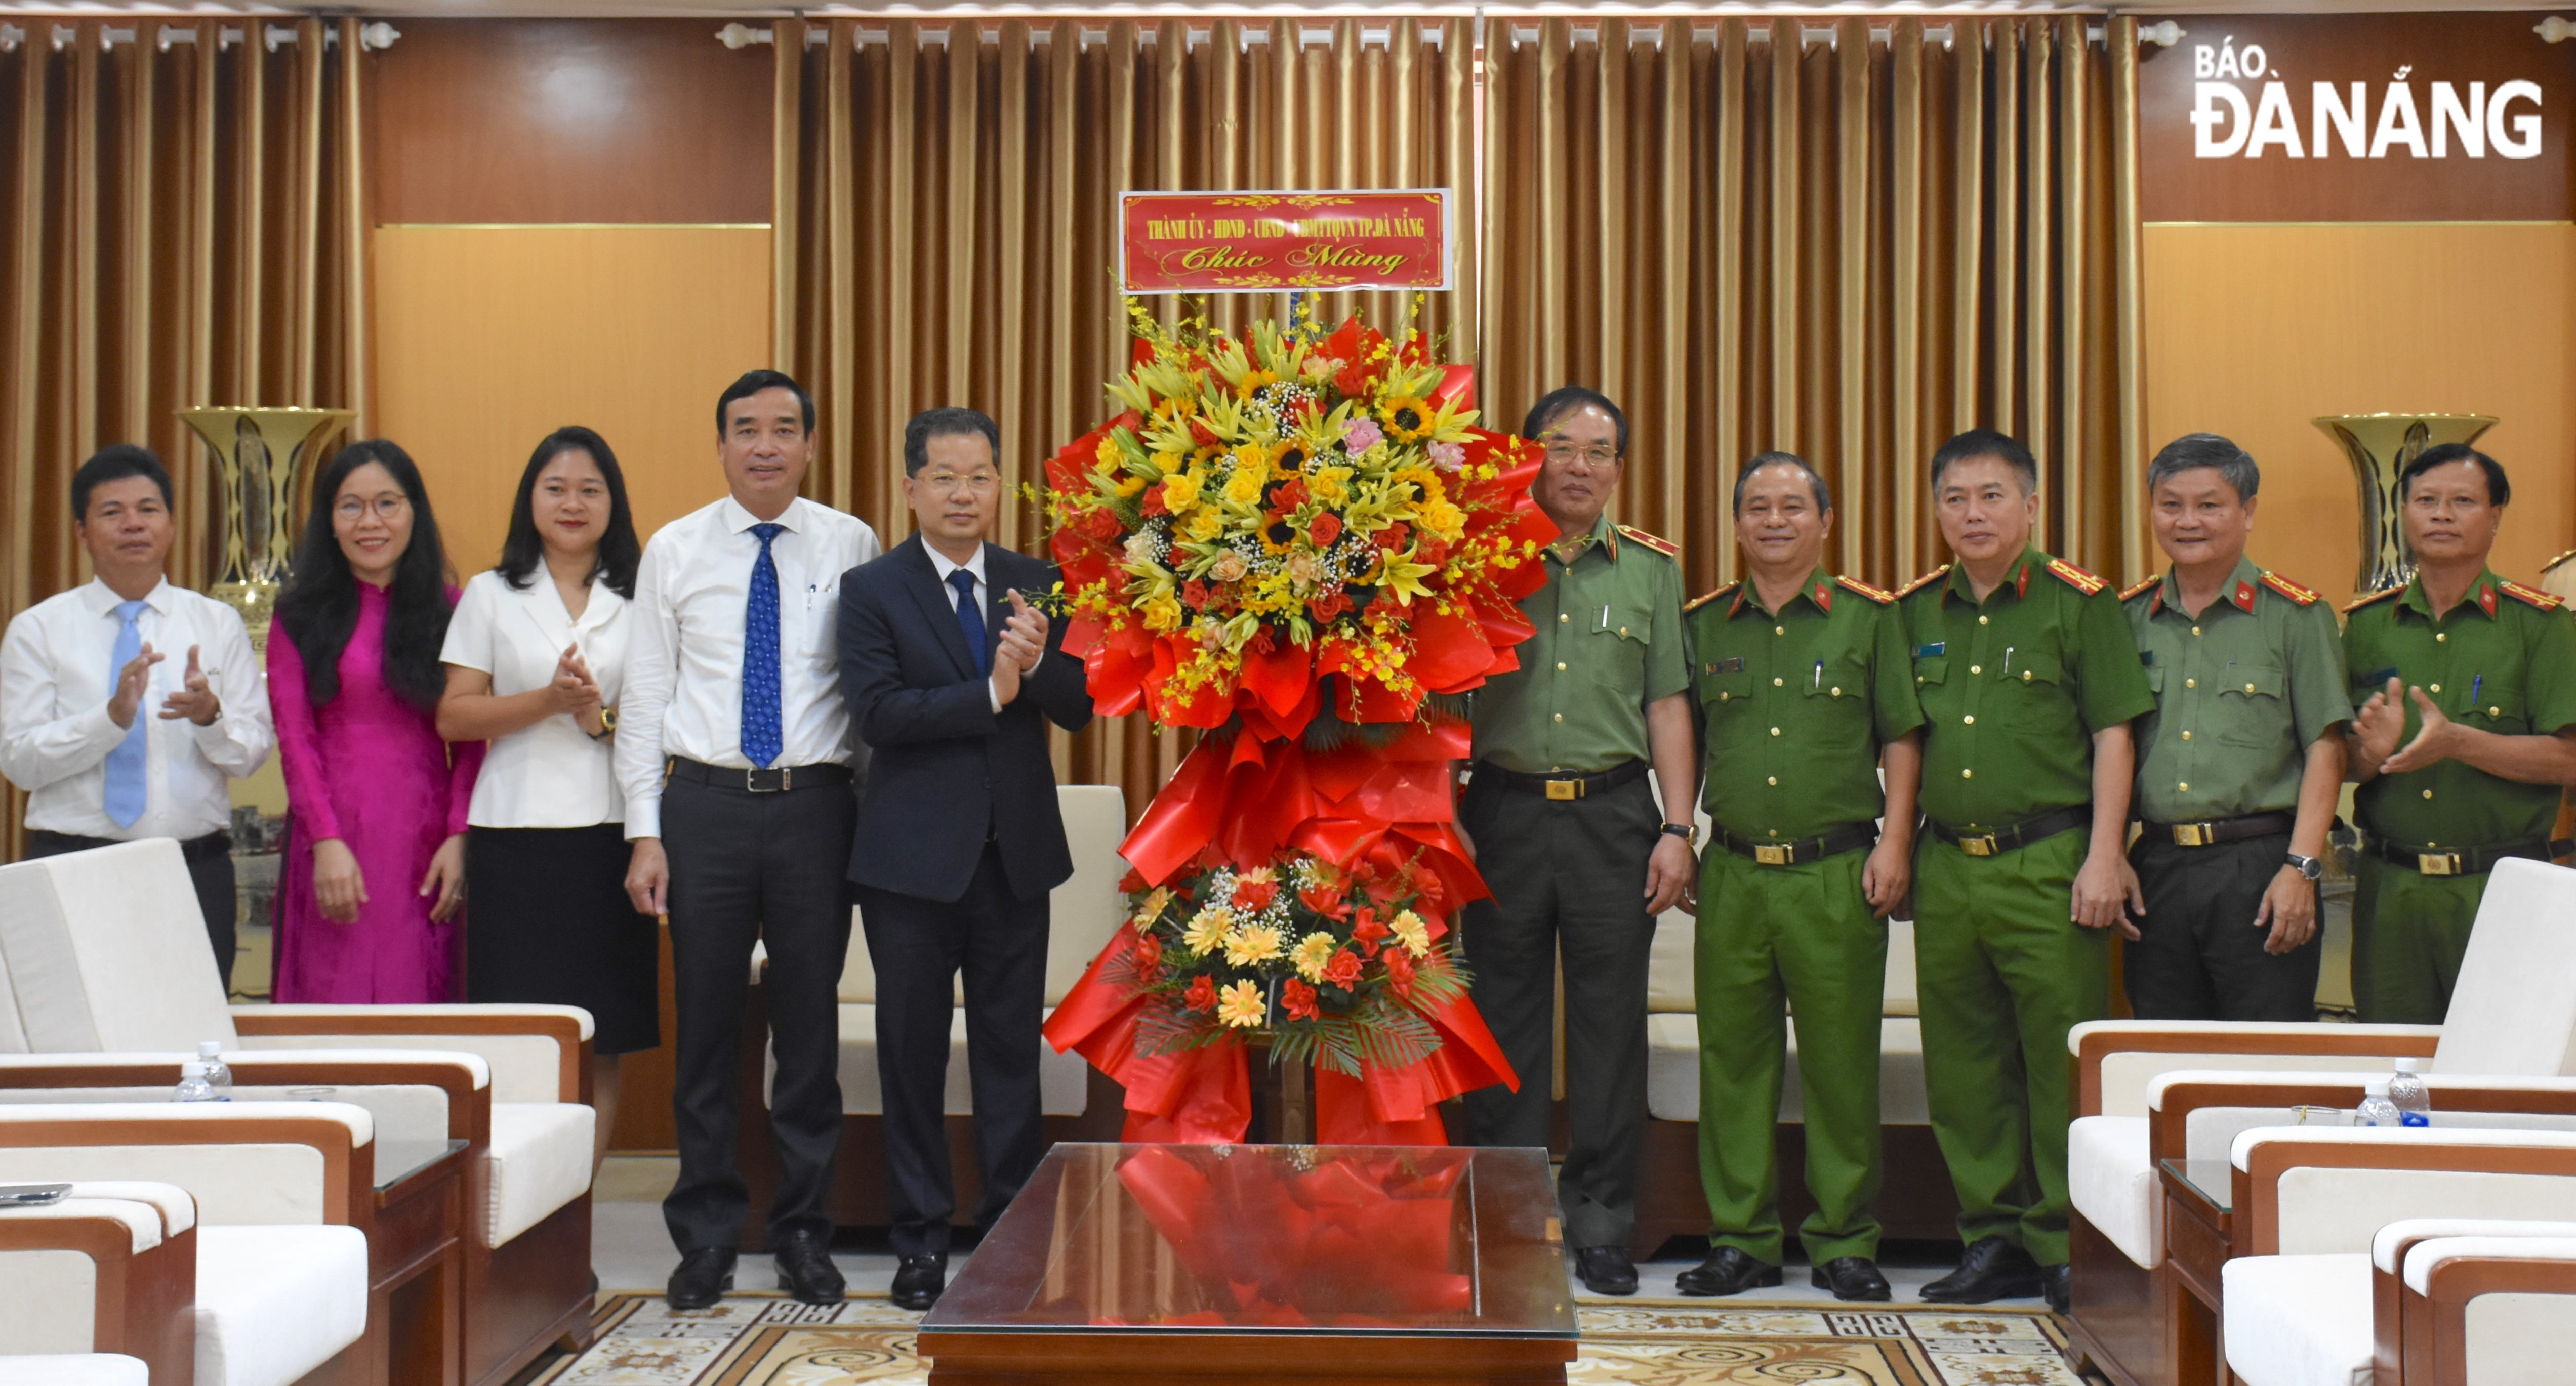 Municipal Party Committee Secretary Nguyen Van Quang (5th, left) and people's Committee Chairman Le Trung Chinh (4th, left) presenting flowers to congratulate the local police force on their special day. Photo: LE HUNG